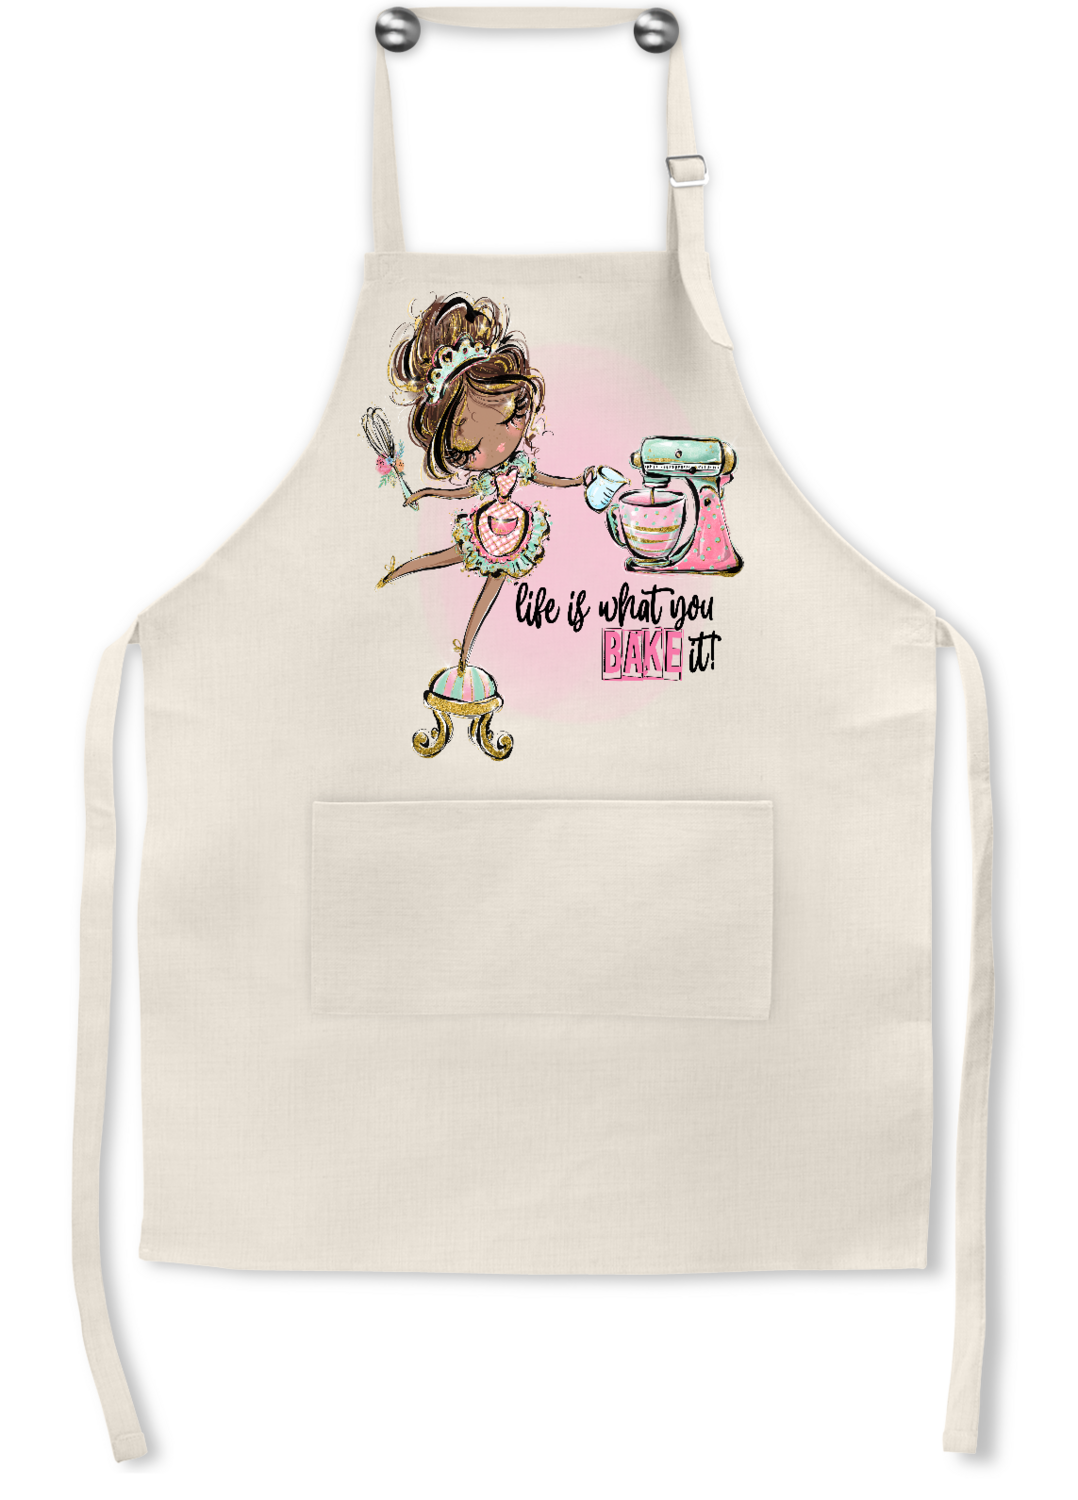 Apron: LIFE IS WHAT YOU BAKE IT